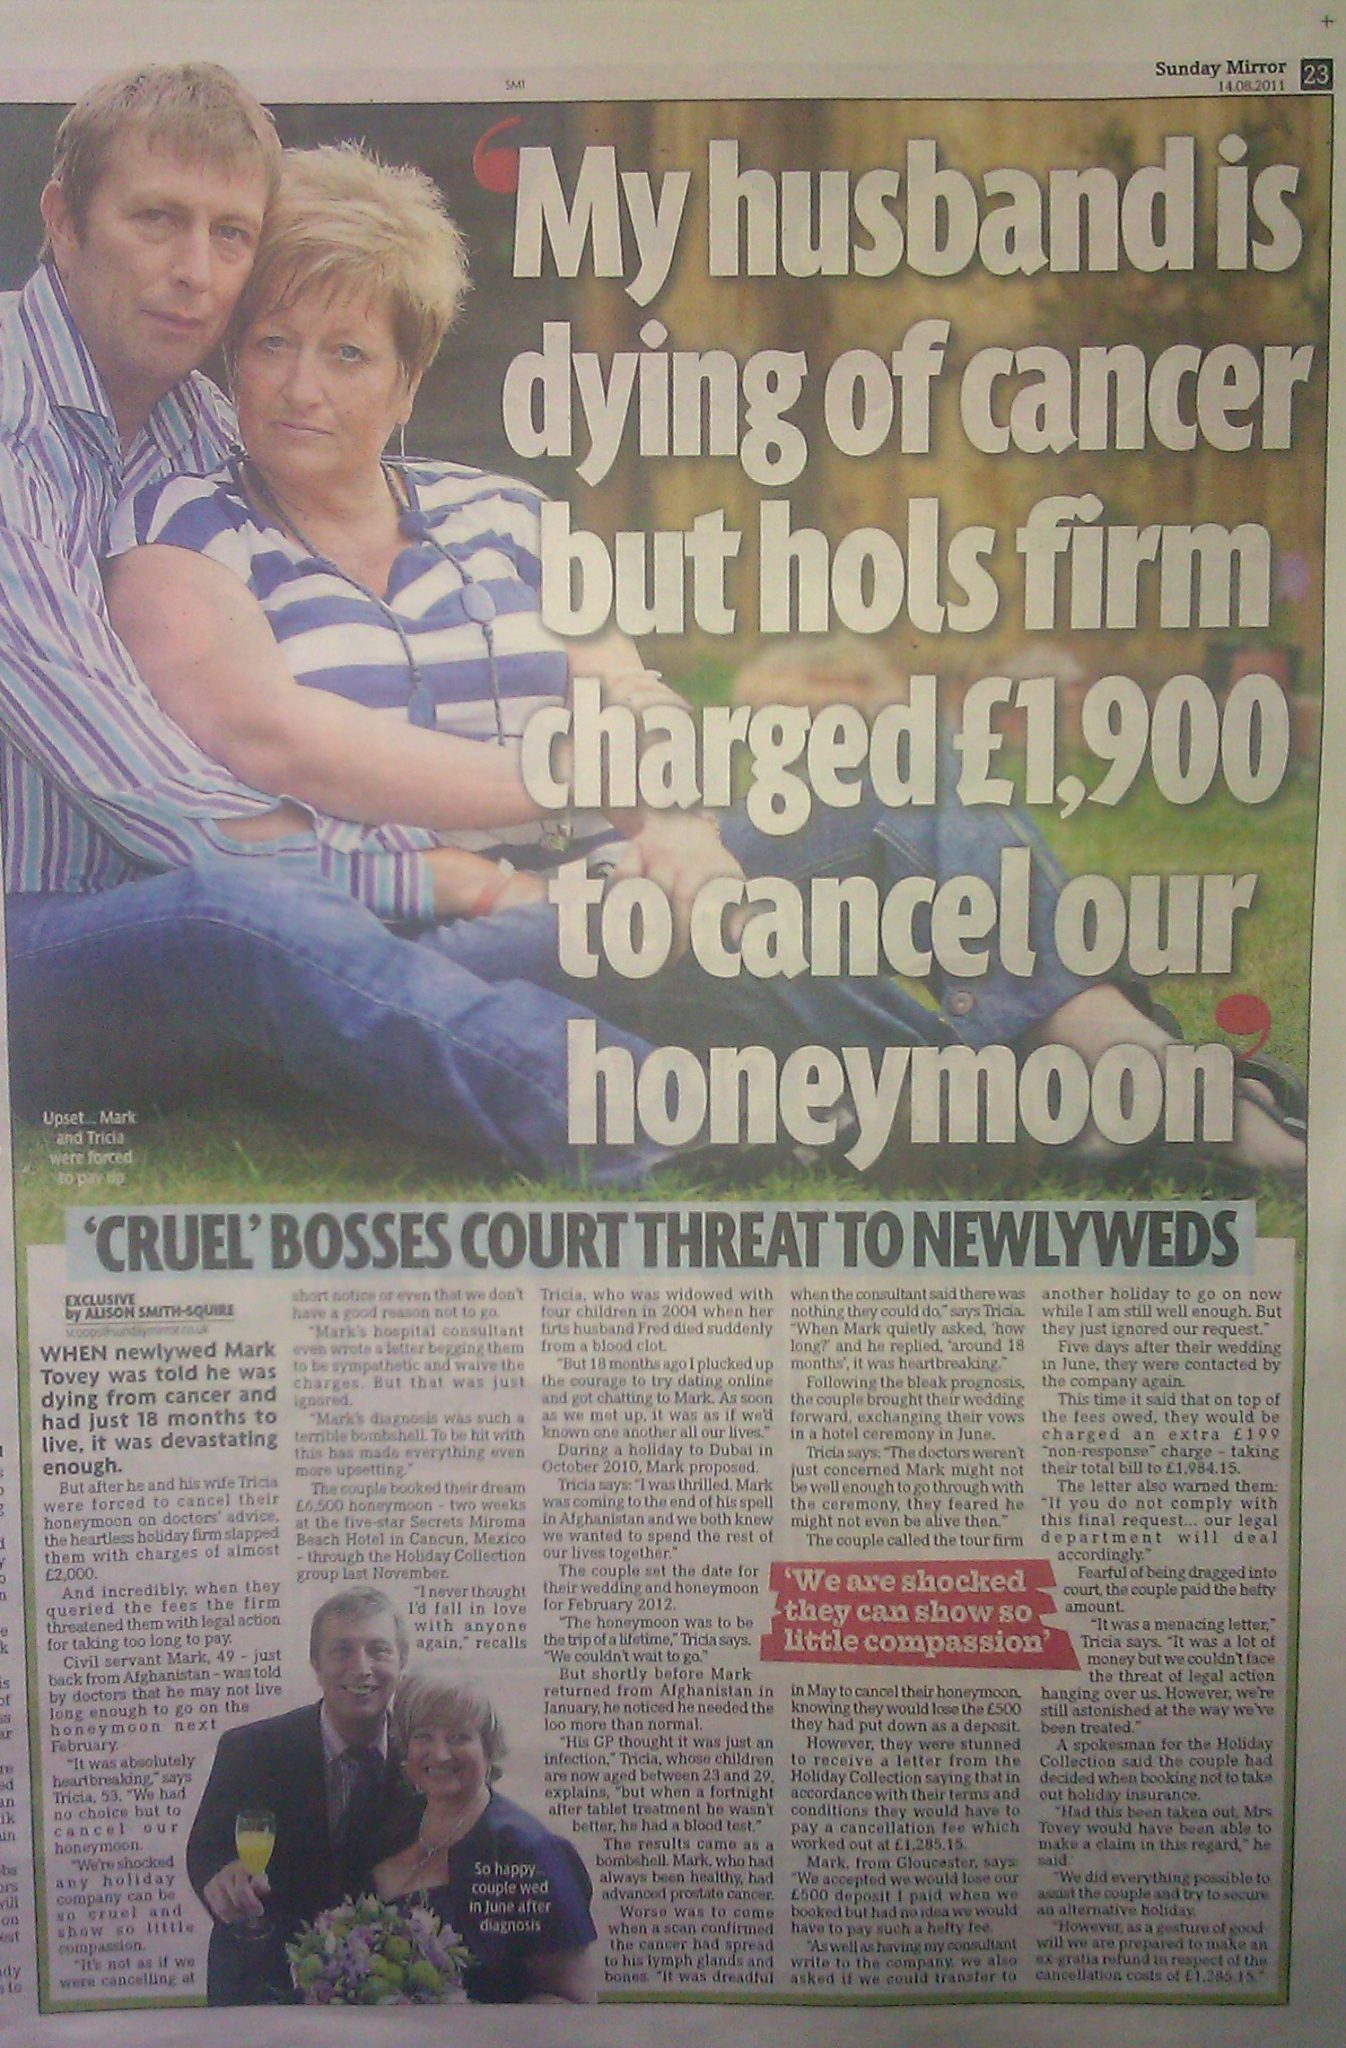 Man with terminal cancer charged £1900 to cancel his honeymoon...